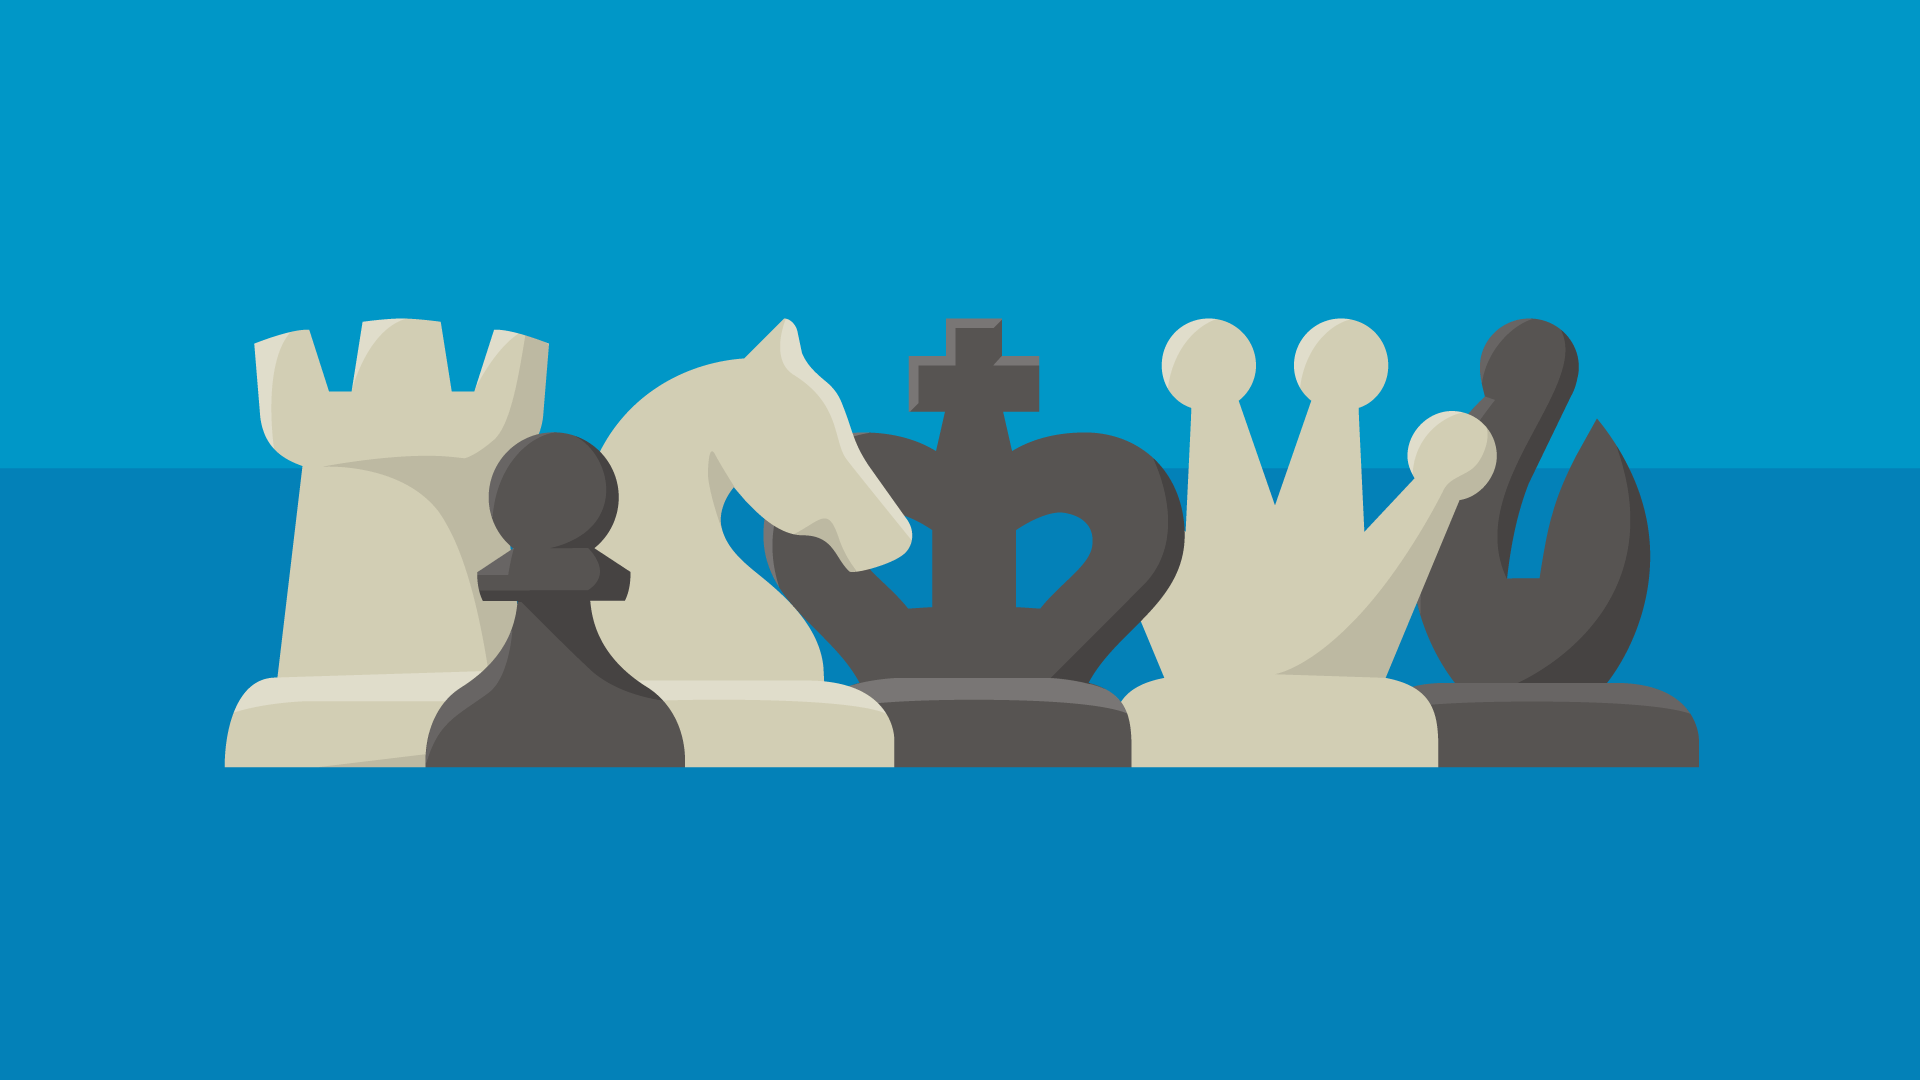 Some black and white chess pieces with a blue two tone background.